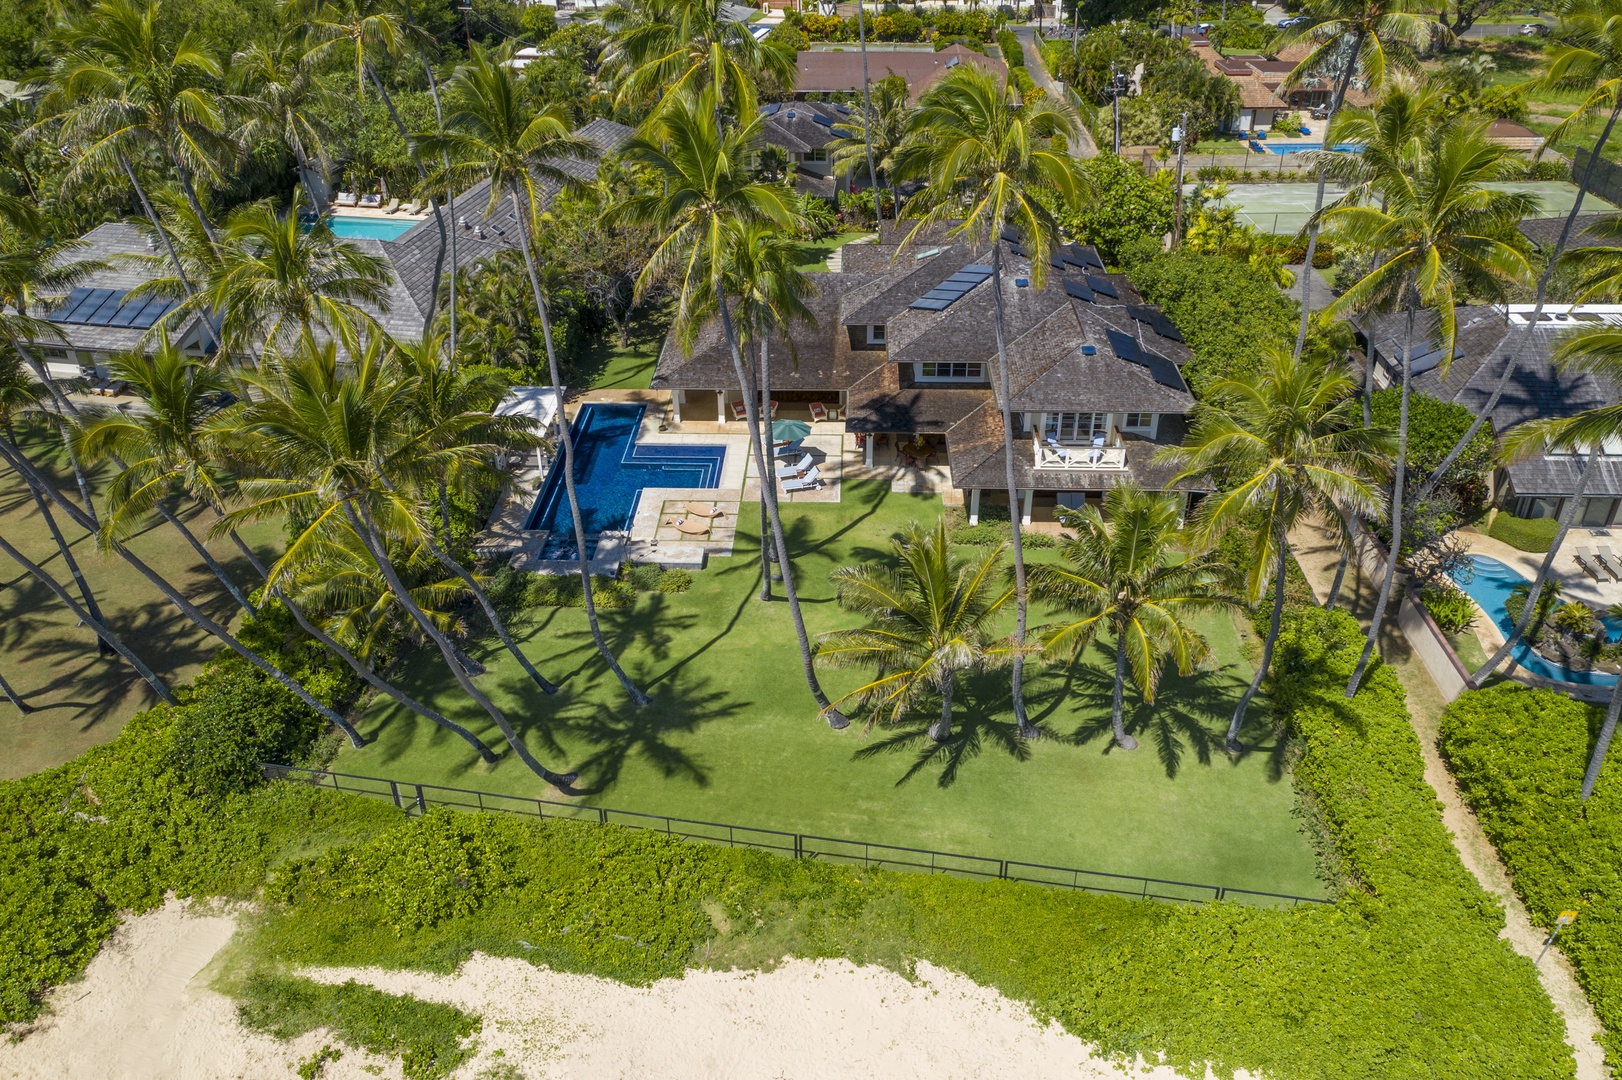 Honolulu Vacation Rentals, Kahala Beachside Estate - Another aerial view